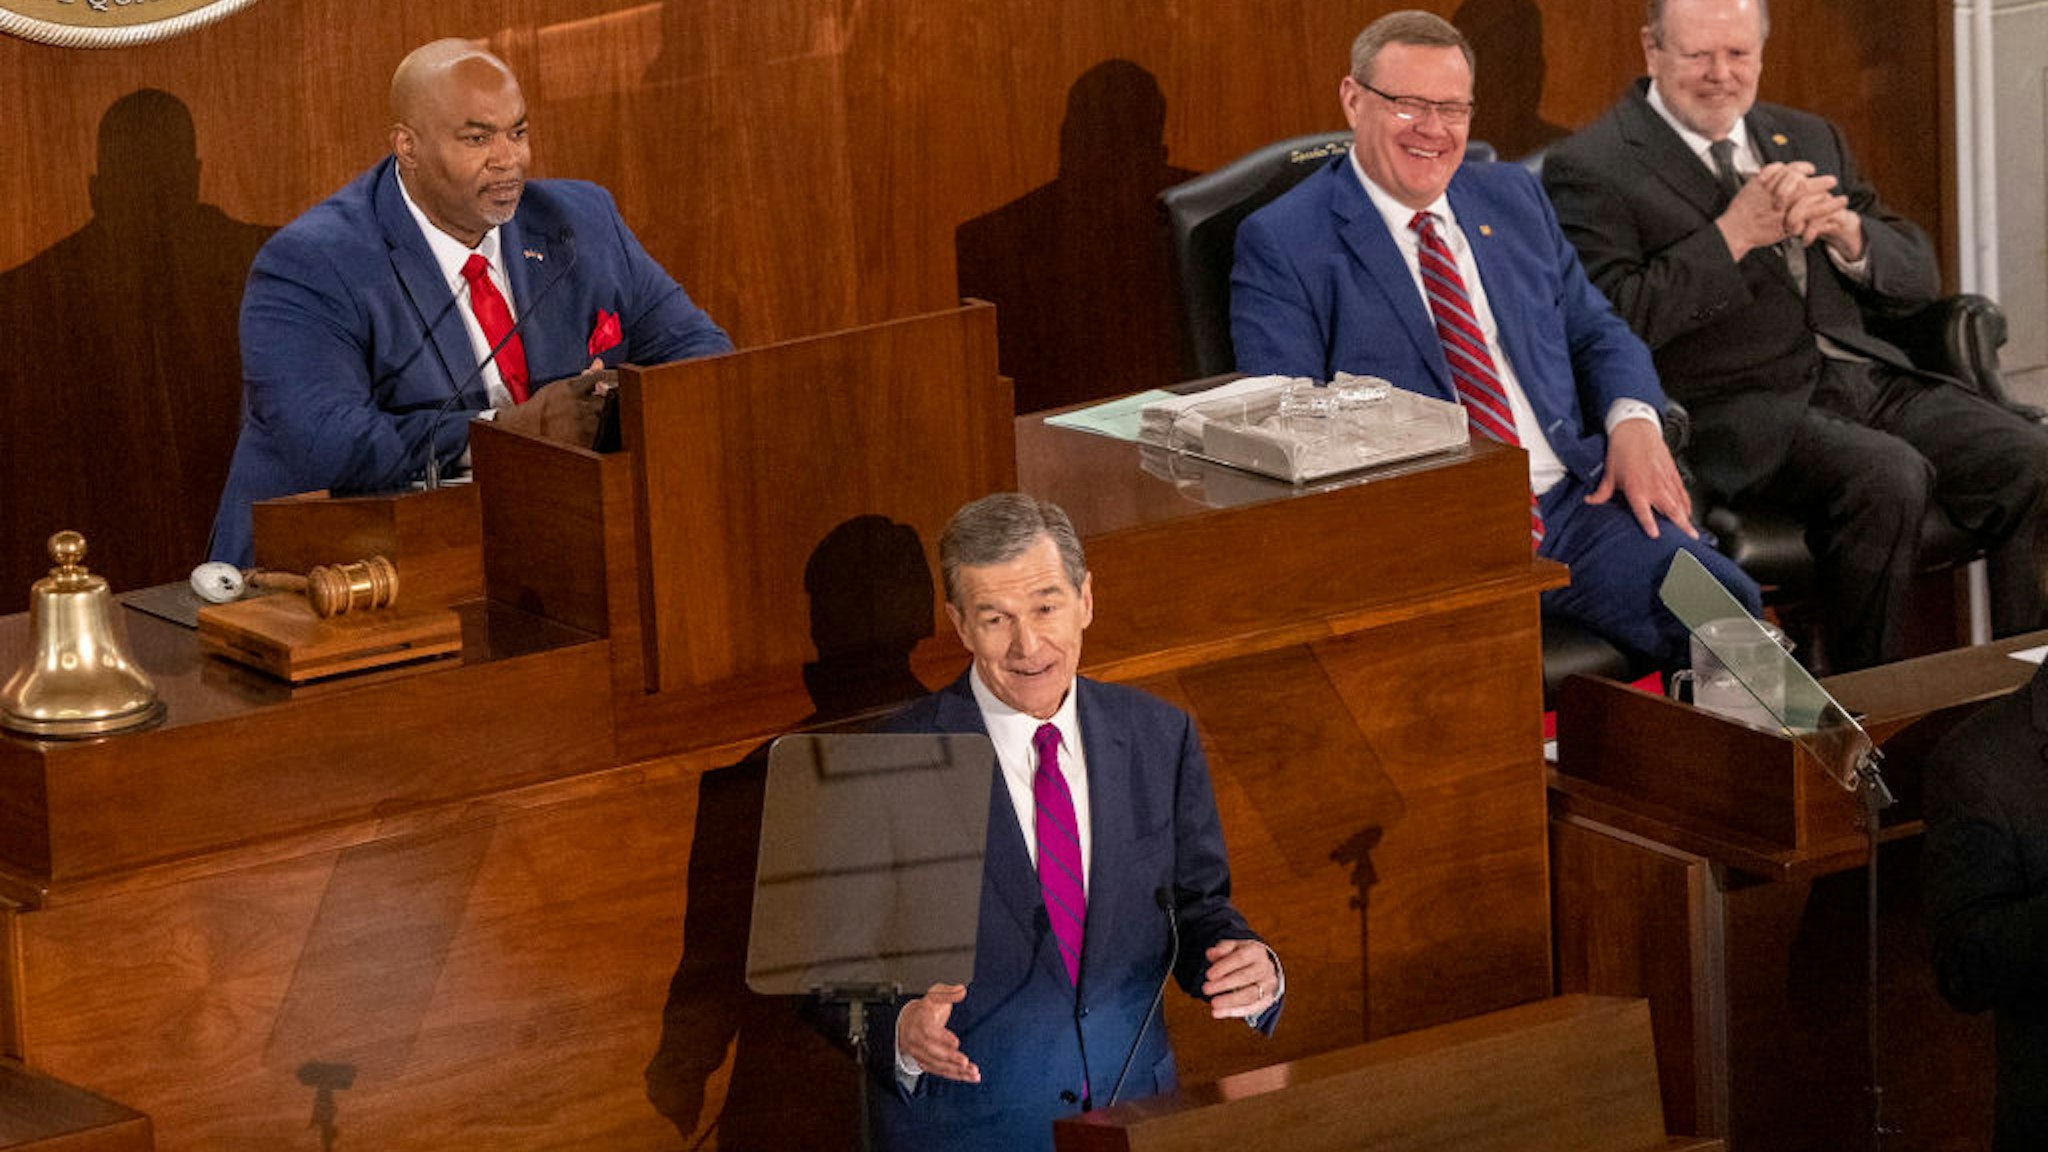 Gov. Roy Cooper delivers his State of the State address to a joint session of the N.C. General Assembly on Monday, March 6, 2023 as, from left, Lt. Gov. Mark Robinson, House Speaker Tim Moore and Senate Leader Phil Berger look on.